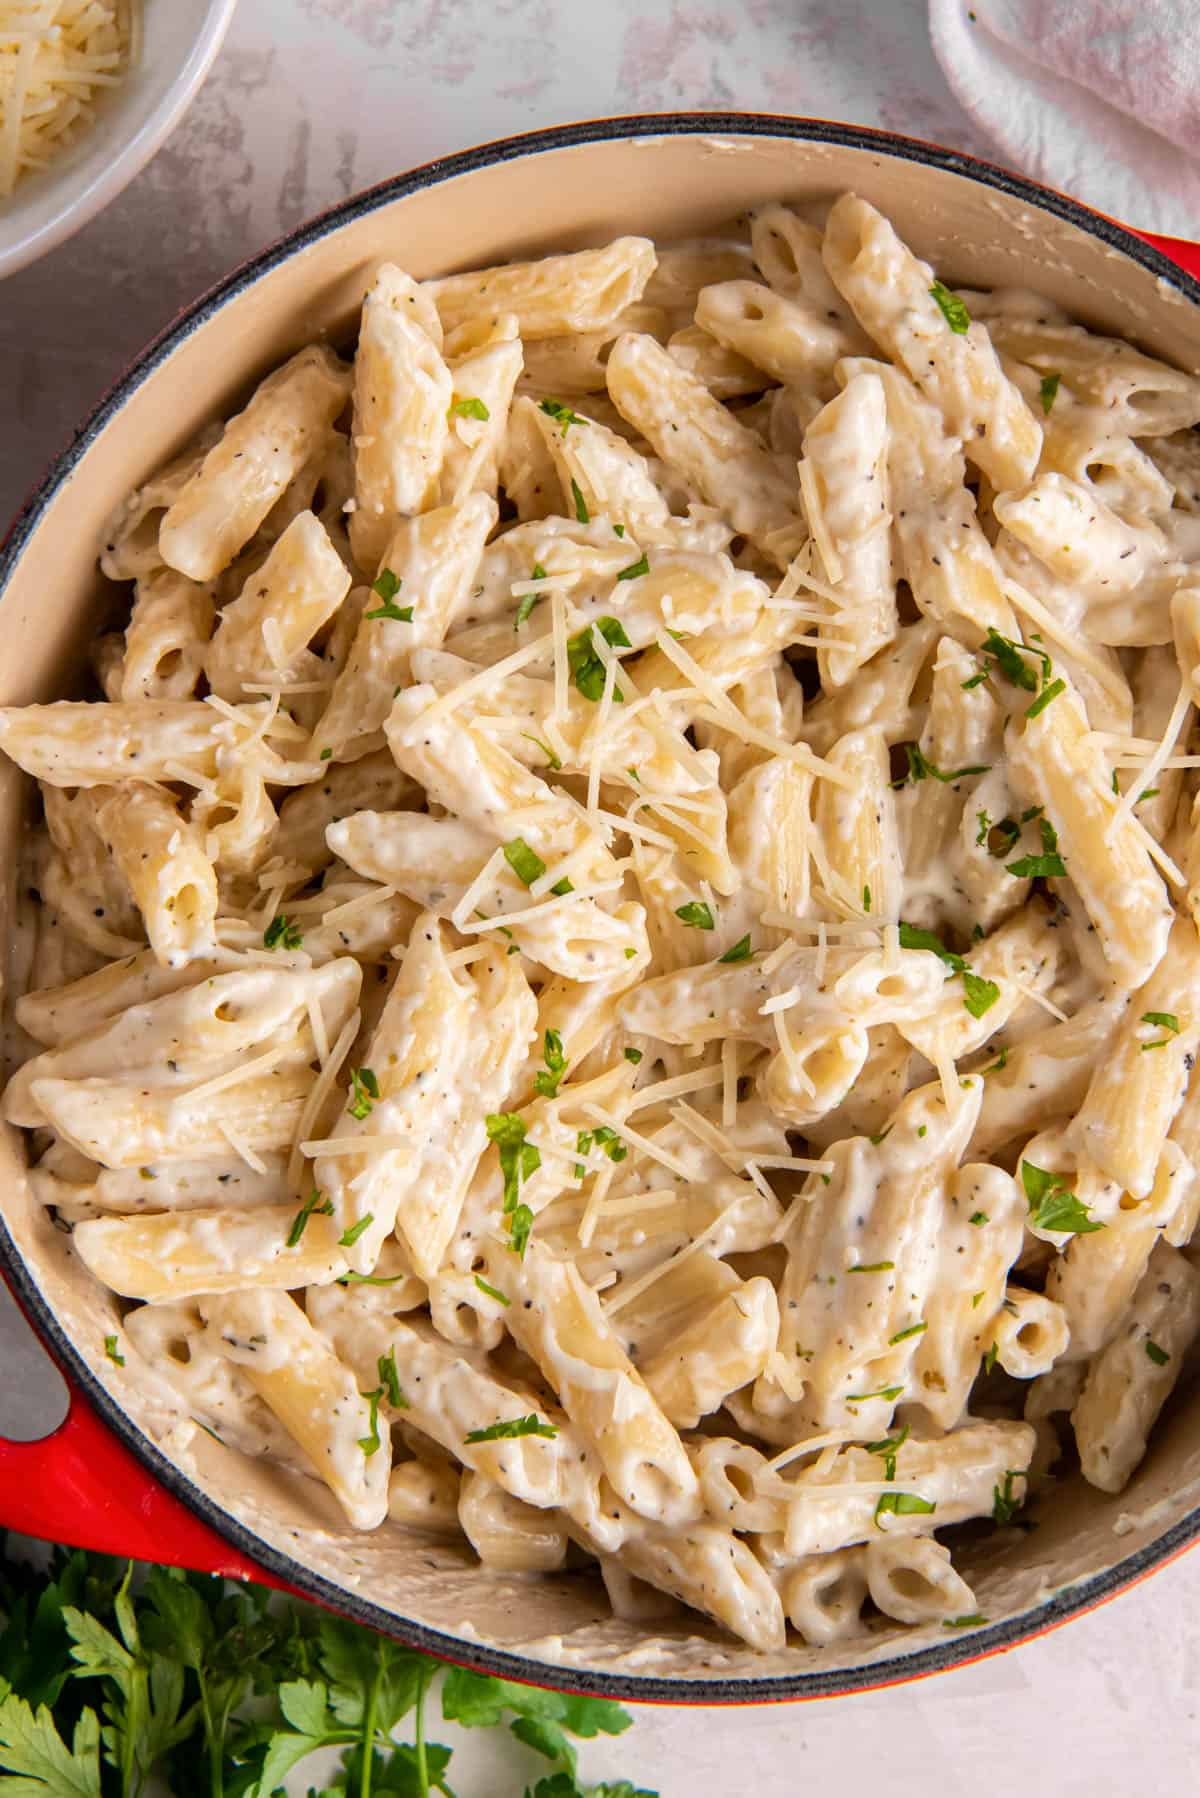 Alfredo penne pasta sits in a large pasta pan. It is sprinkled with Parmesan cheese for serving.